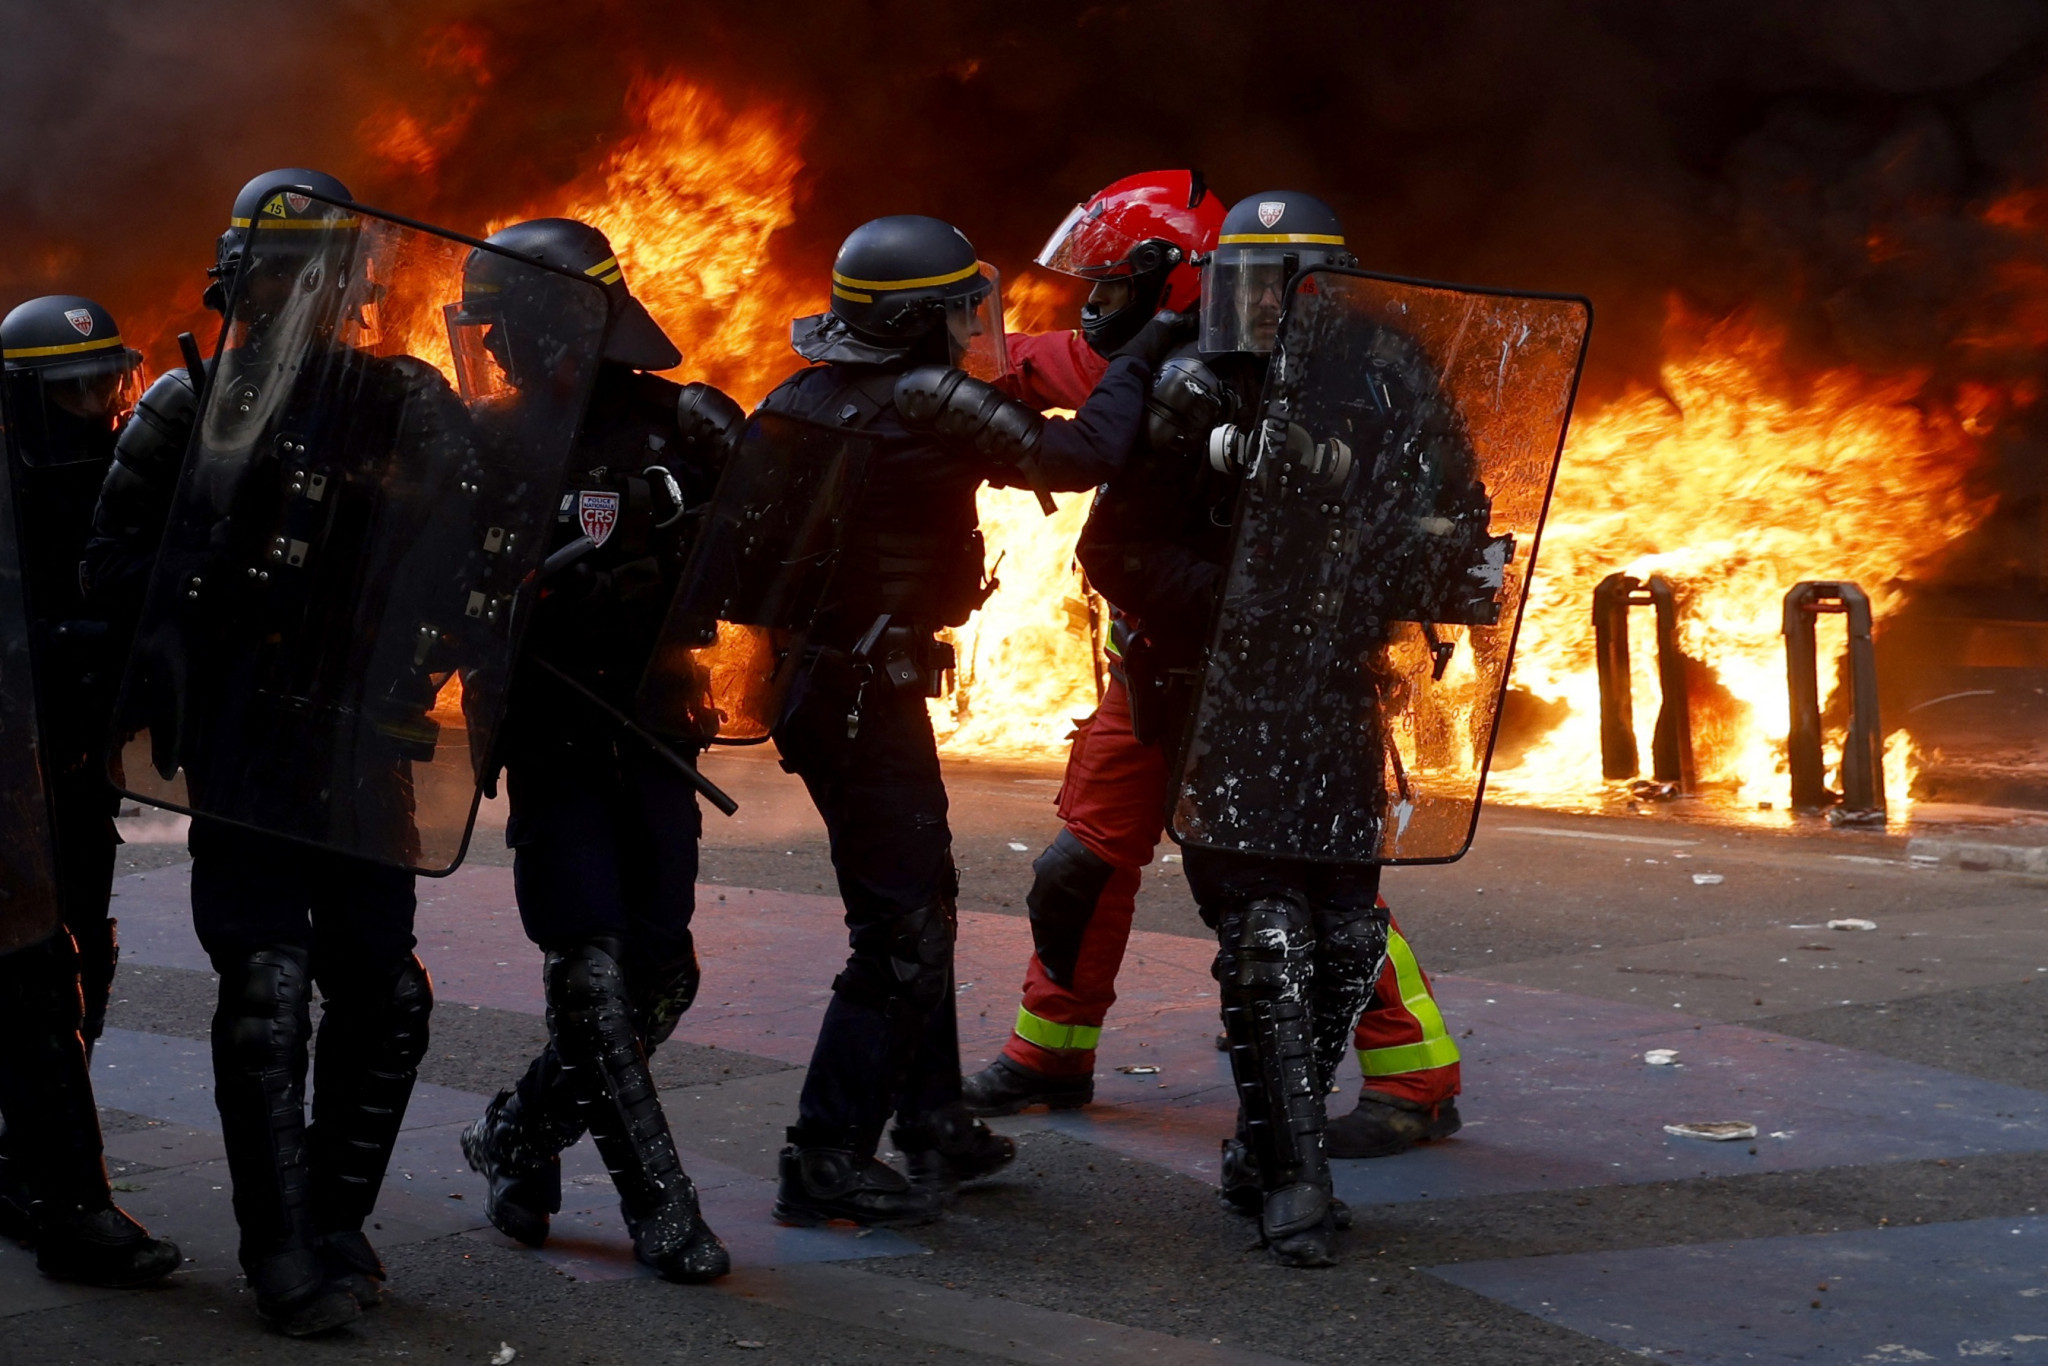 Protests are being held in France over the Government's controverisal pension reforms ©Getty Images